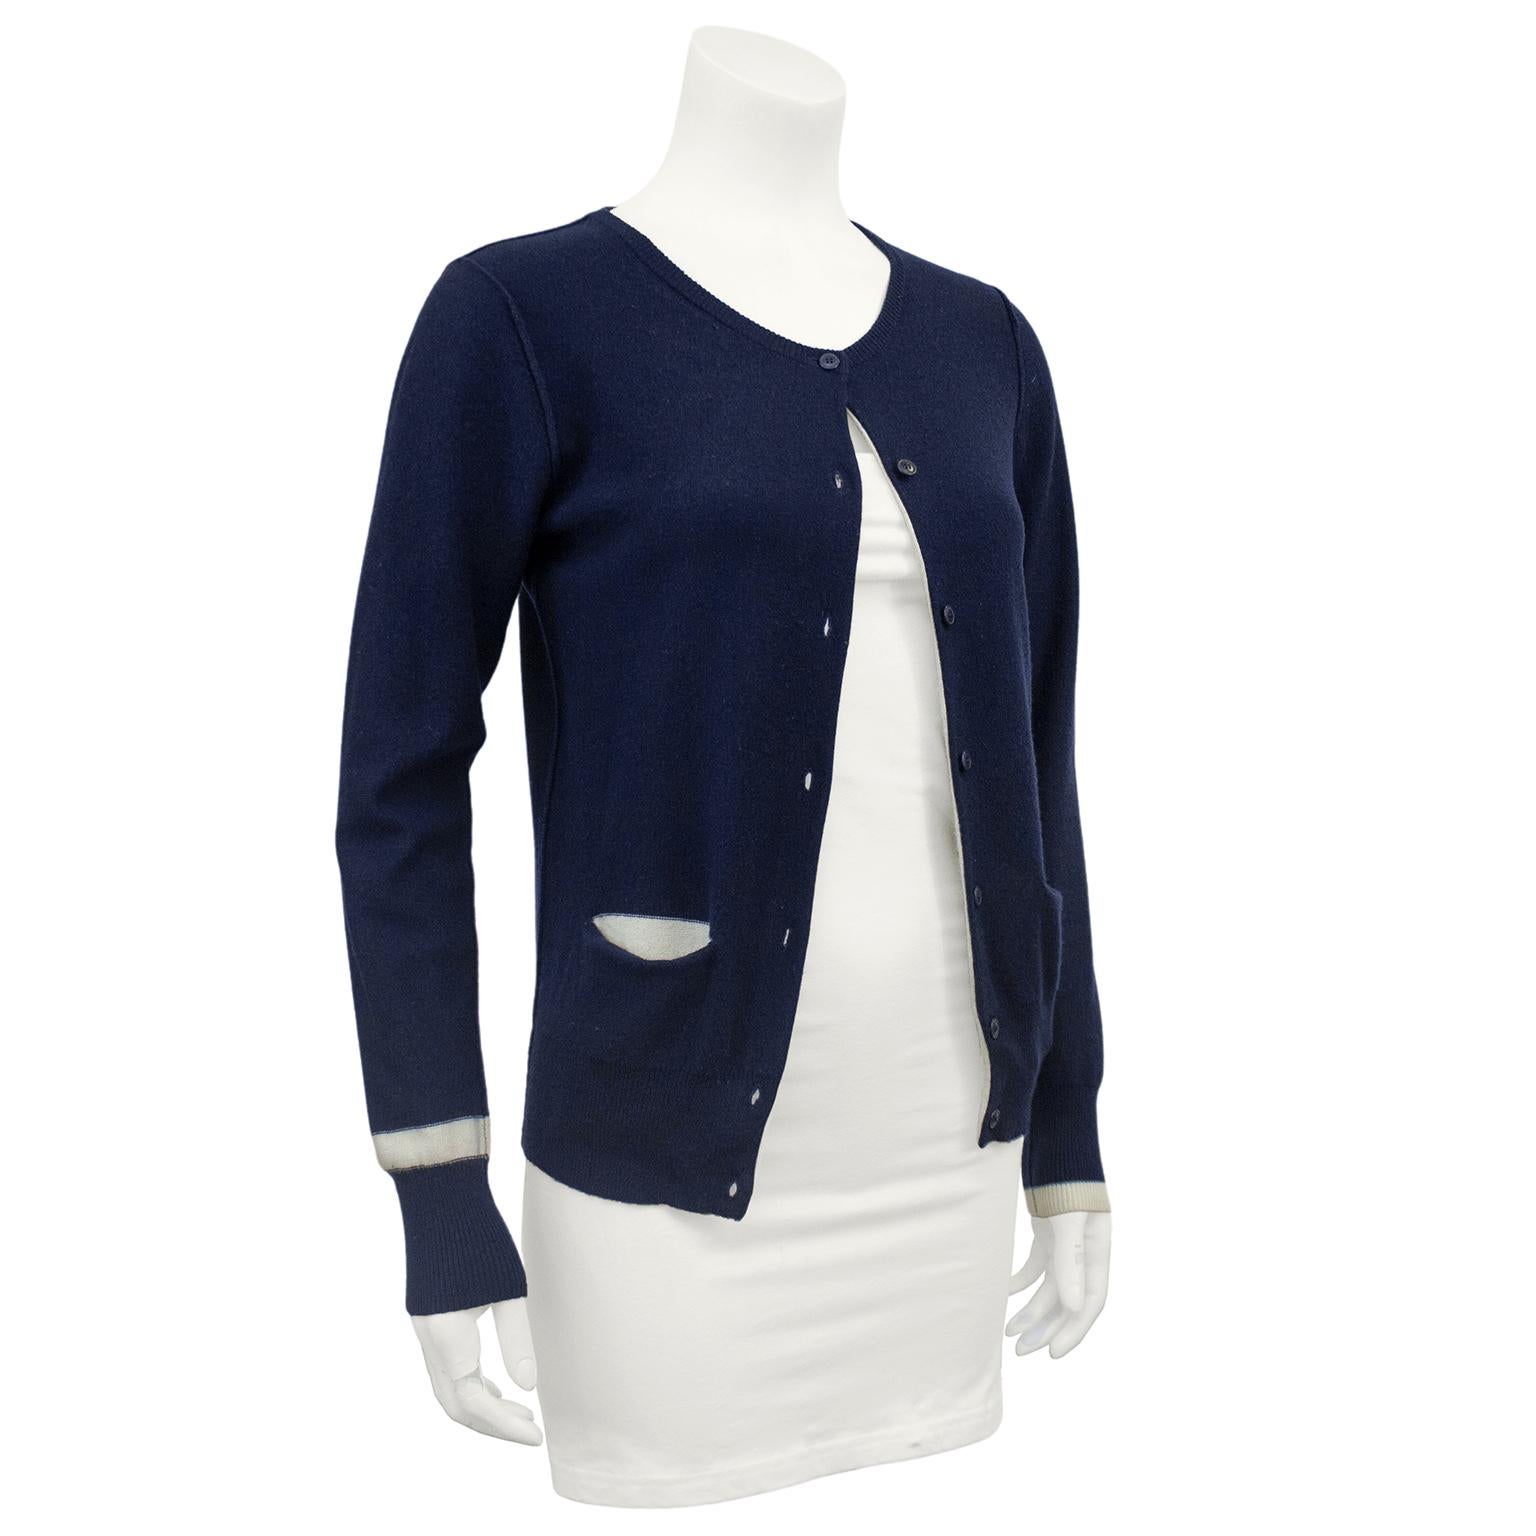 1980s Sonia Rykiel  cotton/cashmere blend knit cardigan. Navy blue with contrasting white at cuffs and interior of horizontal slit pockets. Crewneck with matching blue buttons. Ribbed cuffs and hem. Excellent vintage condition. Marked FR size 36 -